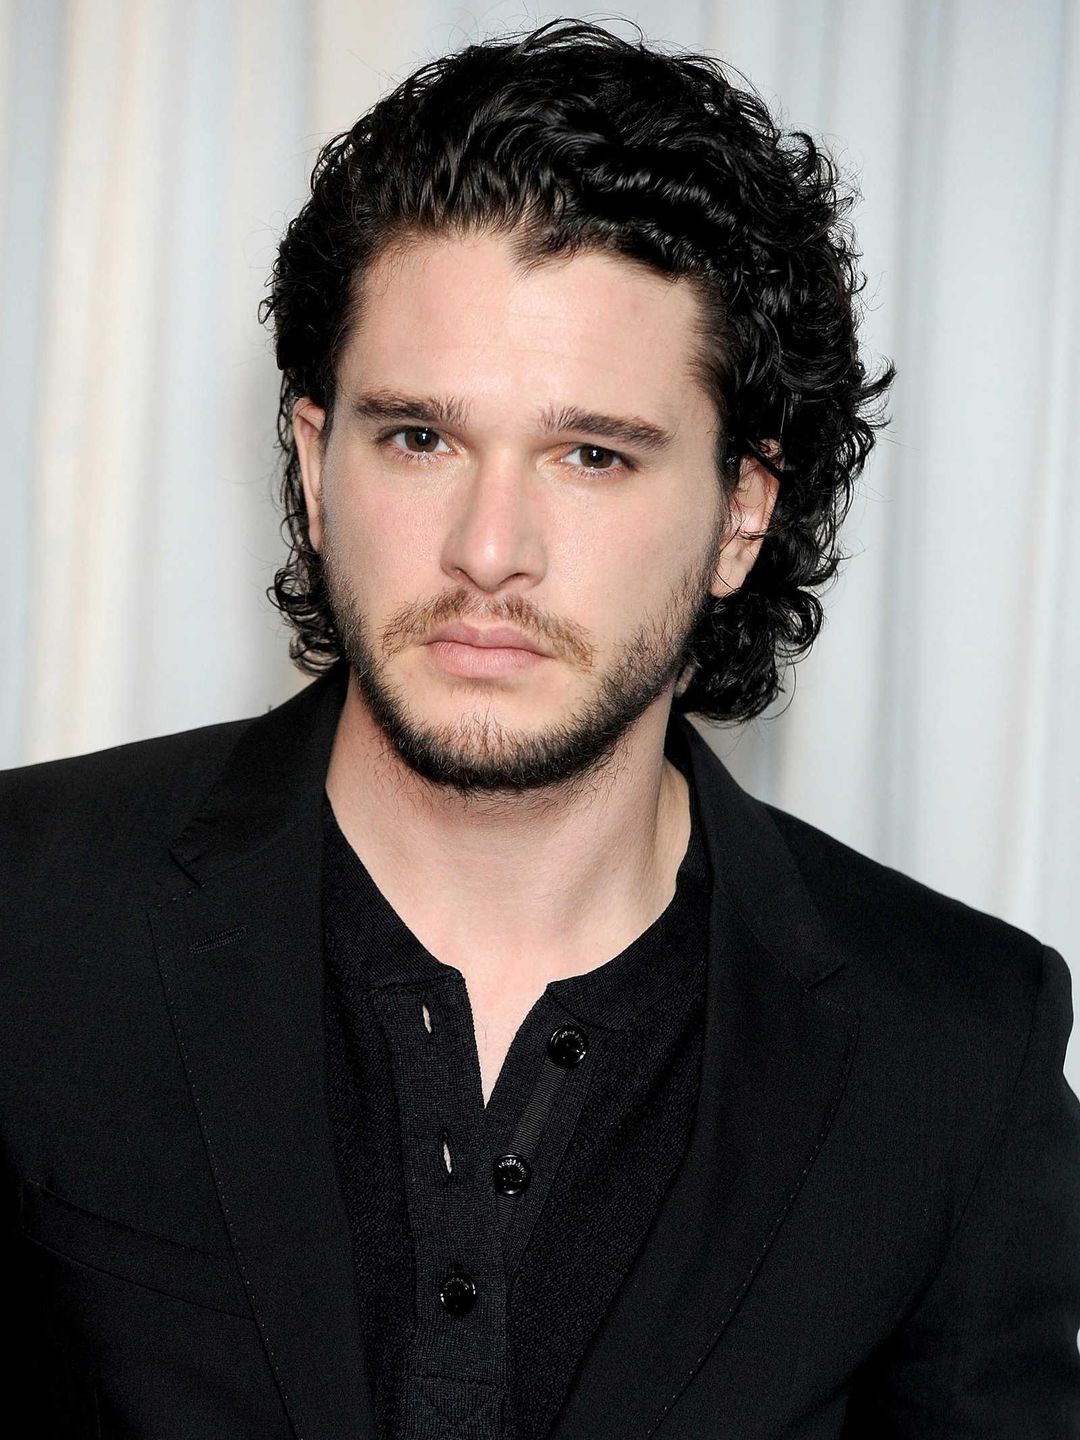 Kit Harington how did he became famous